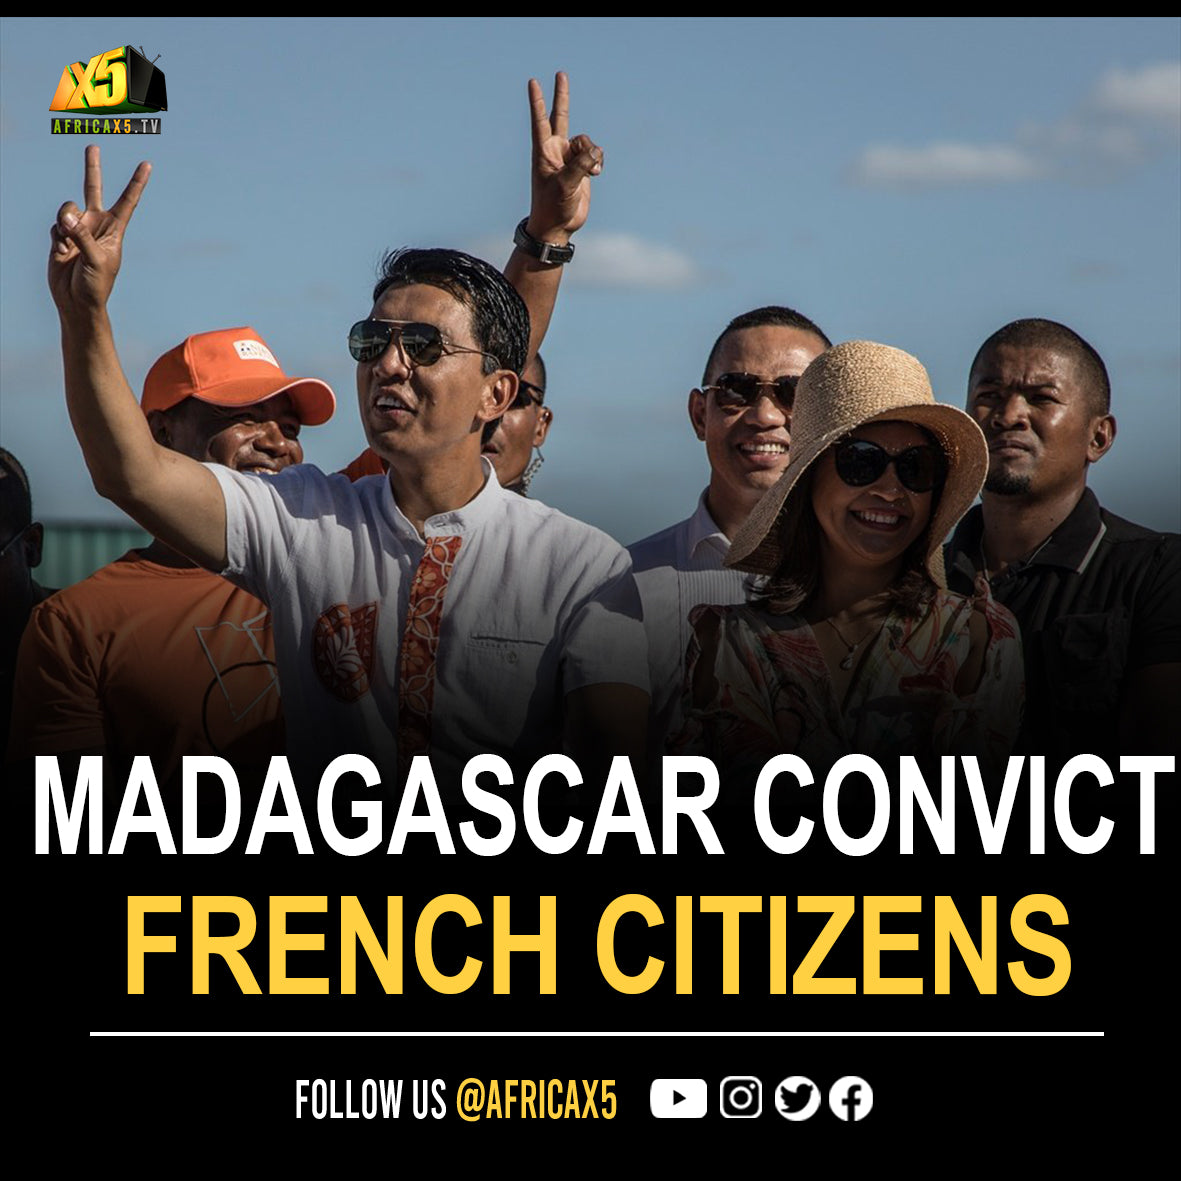 A court in Madagascar has convicted two French citizens of having plotted a failed coup against President Andry Rajoelina and sentenced them to 10 years and 20 years of forced labor.